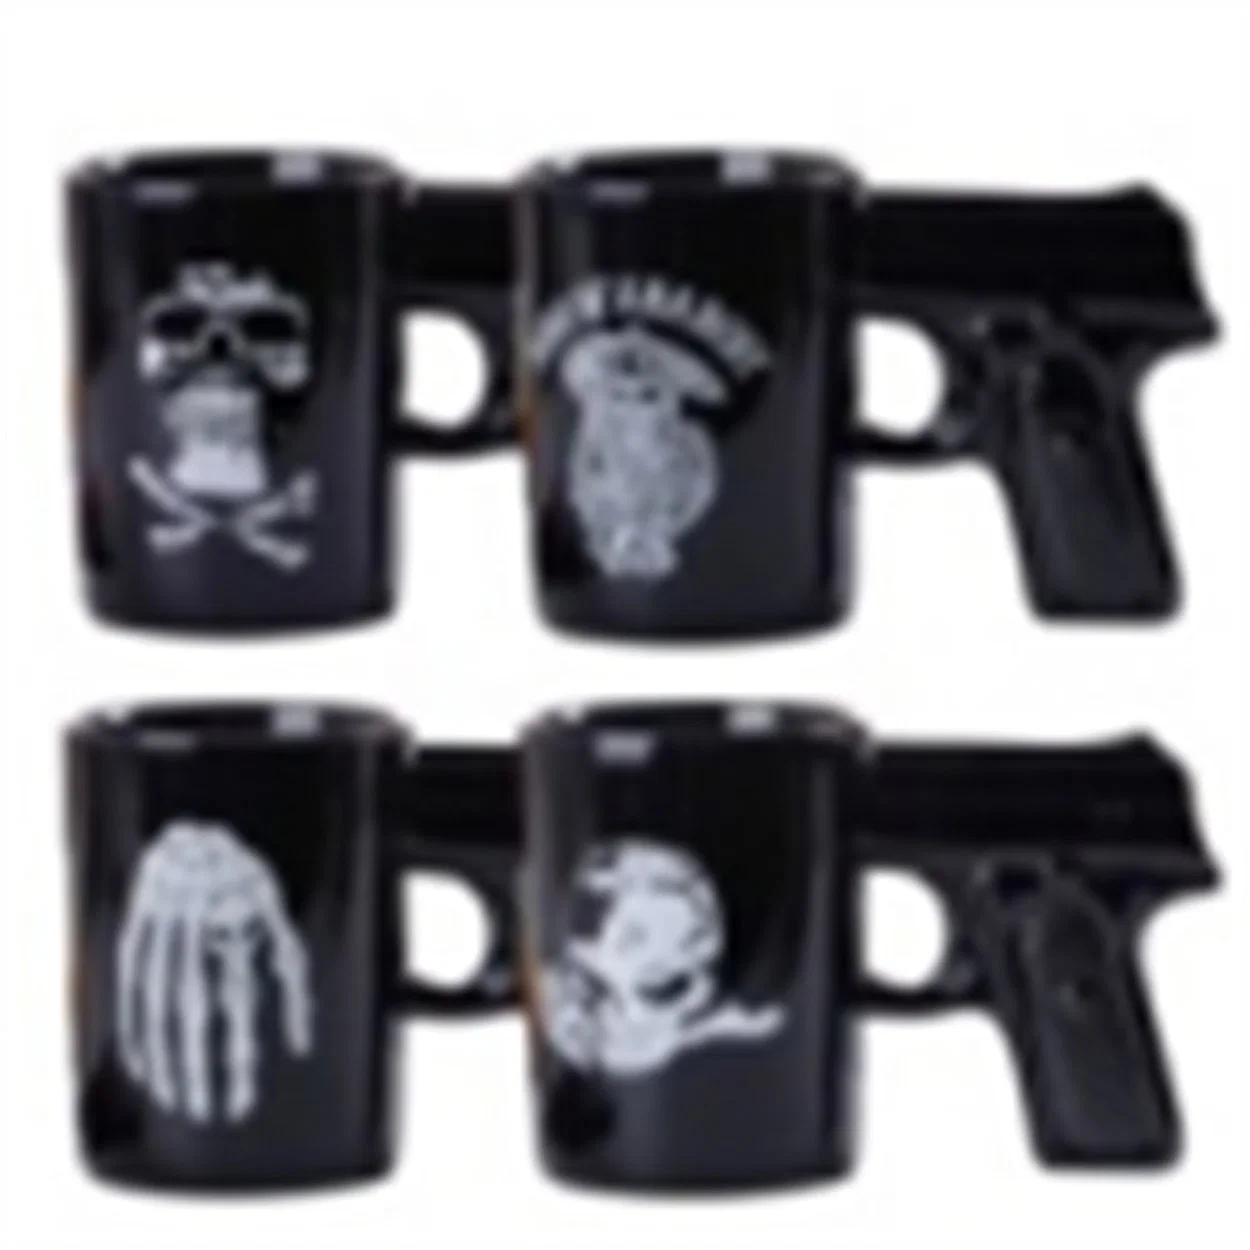 Creative and Quirky Water Cup Pistol-Shaped Ceramic Gift Mug